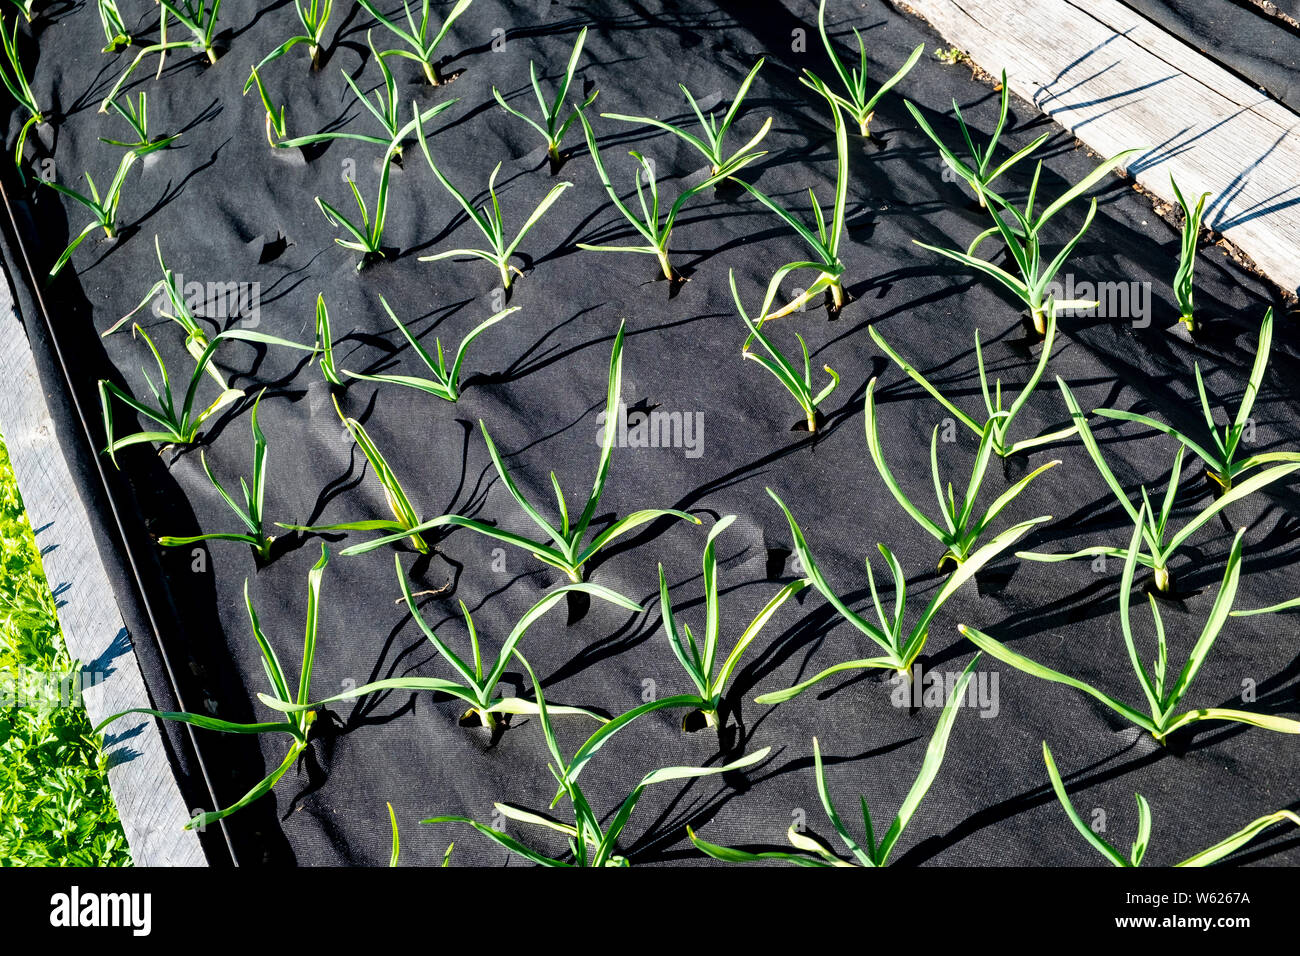 Young garlic plants protected from weeds by being grown through weed gunnel fabric Stock Photo